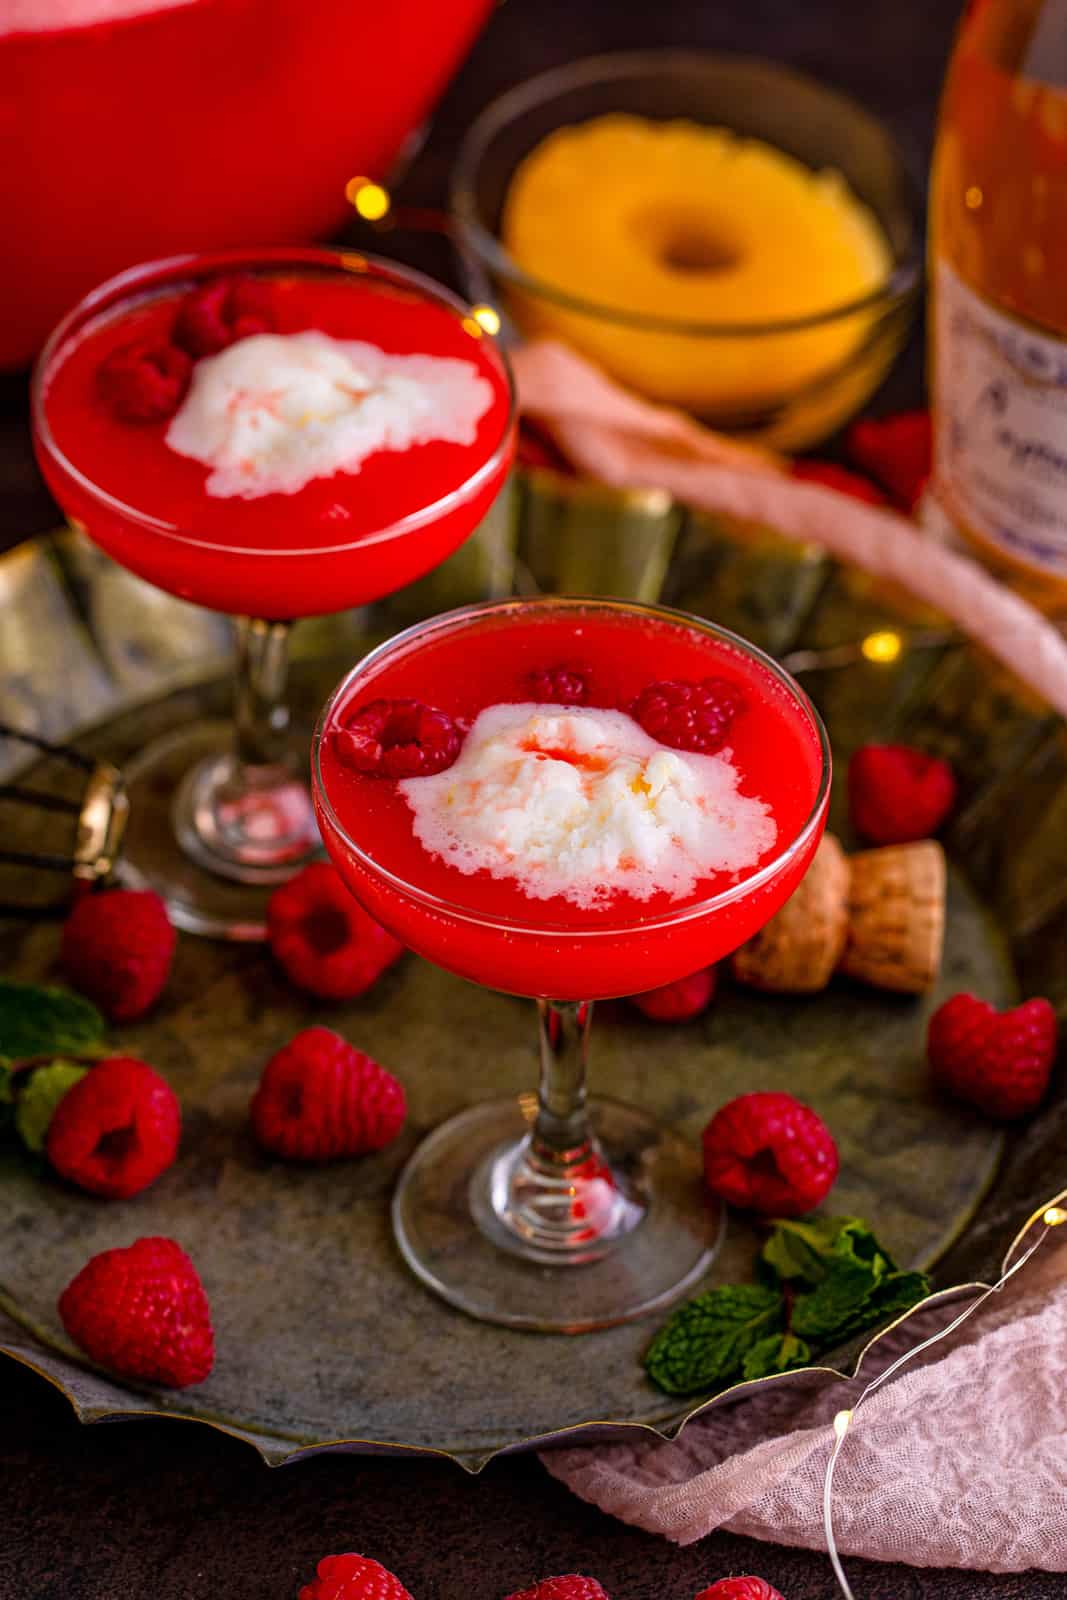 Two glasses of Boozy Pineapple Punch no tray with raspberries.